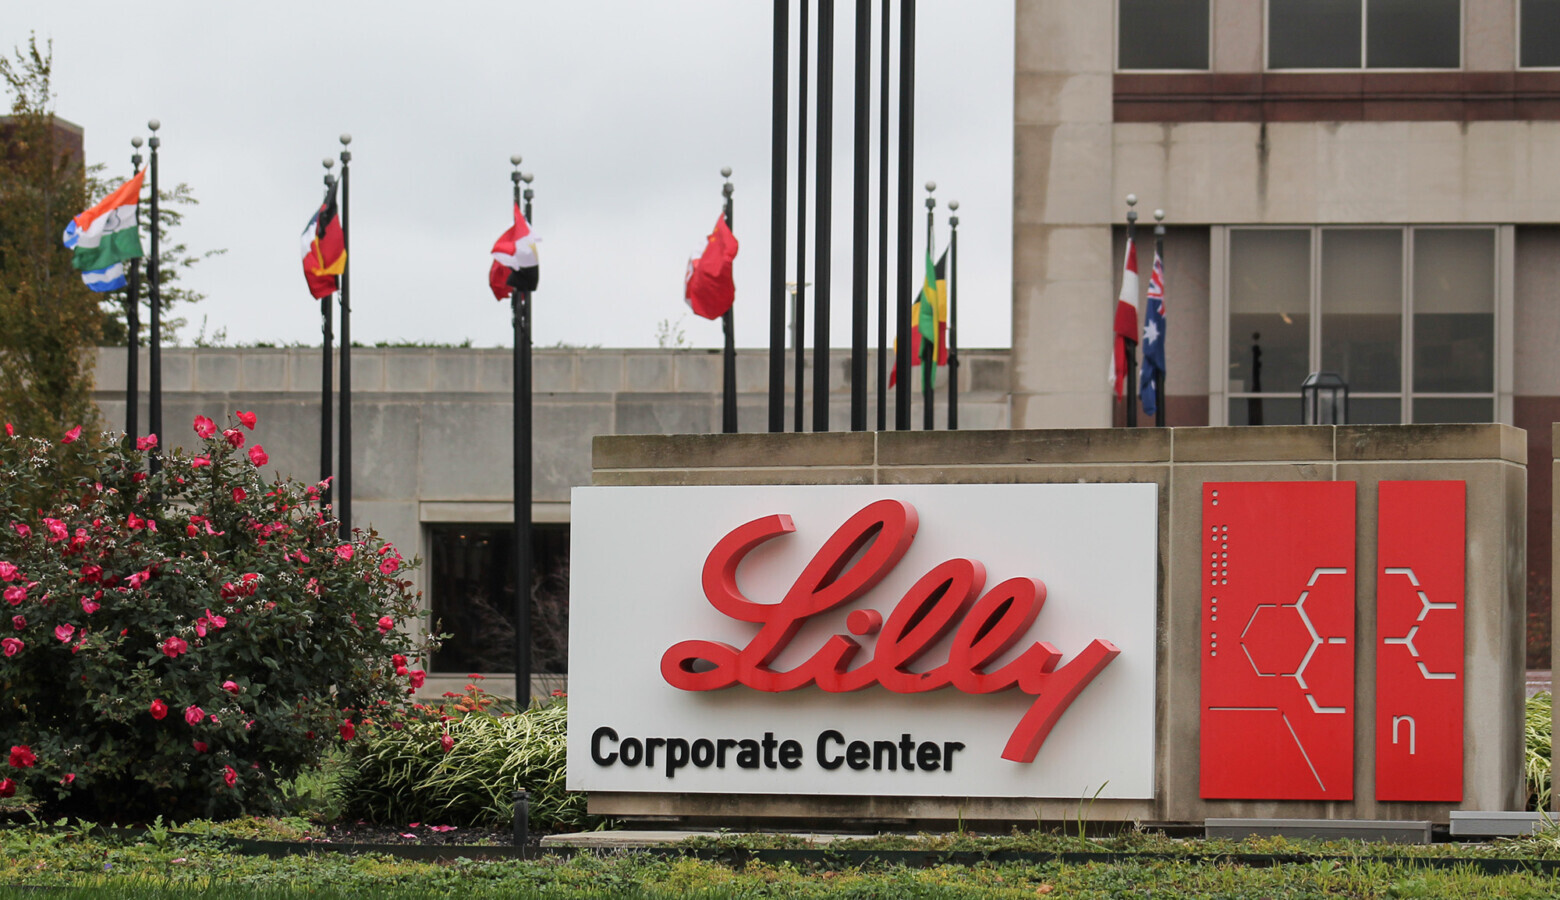 Eli Lilly's corporate headquarters in Indianapolis. The company is supplying 400,000 tablets of on its COVID-19 treatments to India. (Lauren Chapman/IPB News)